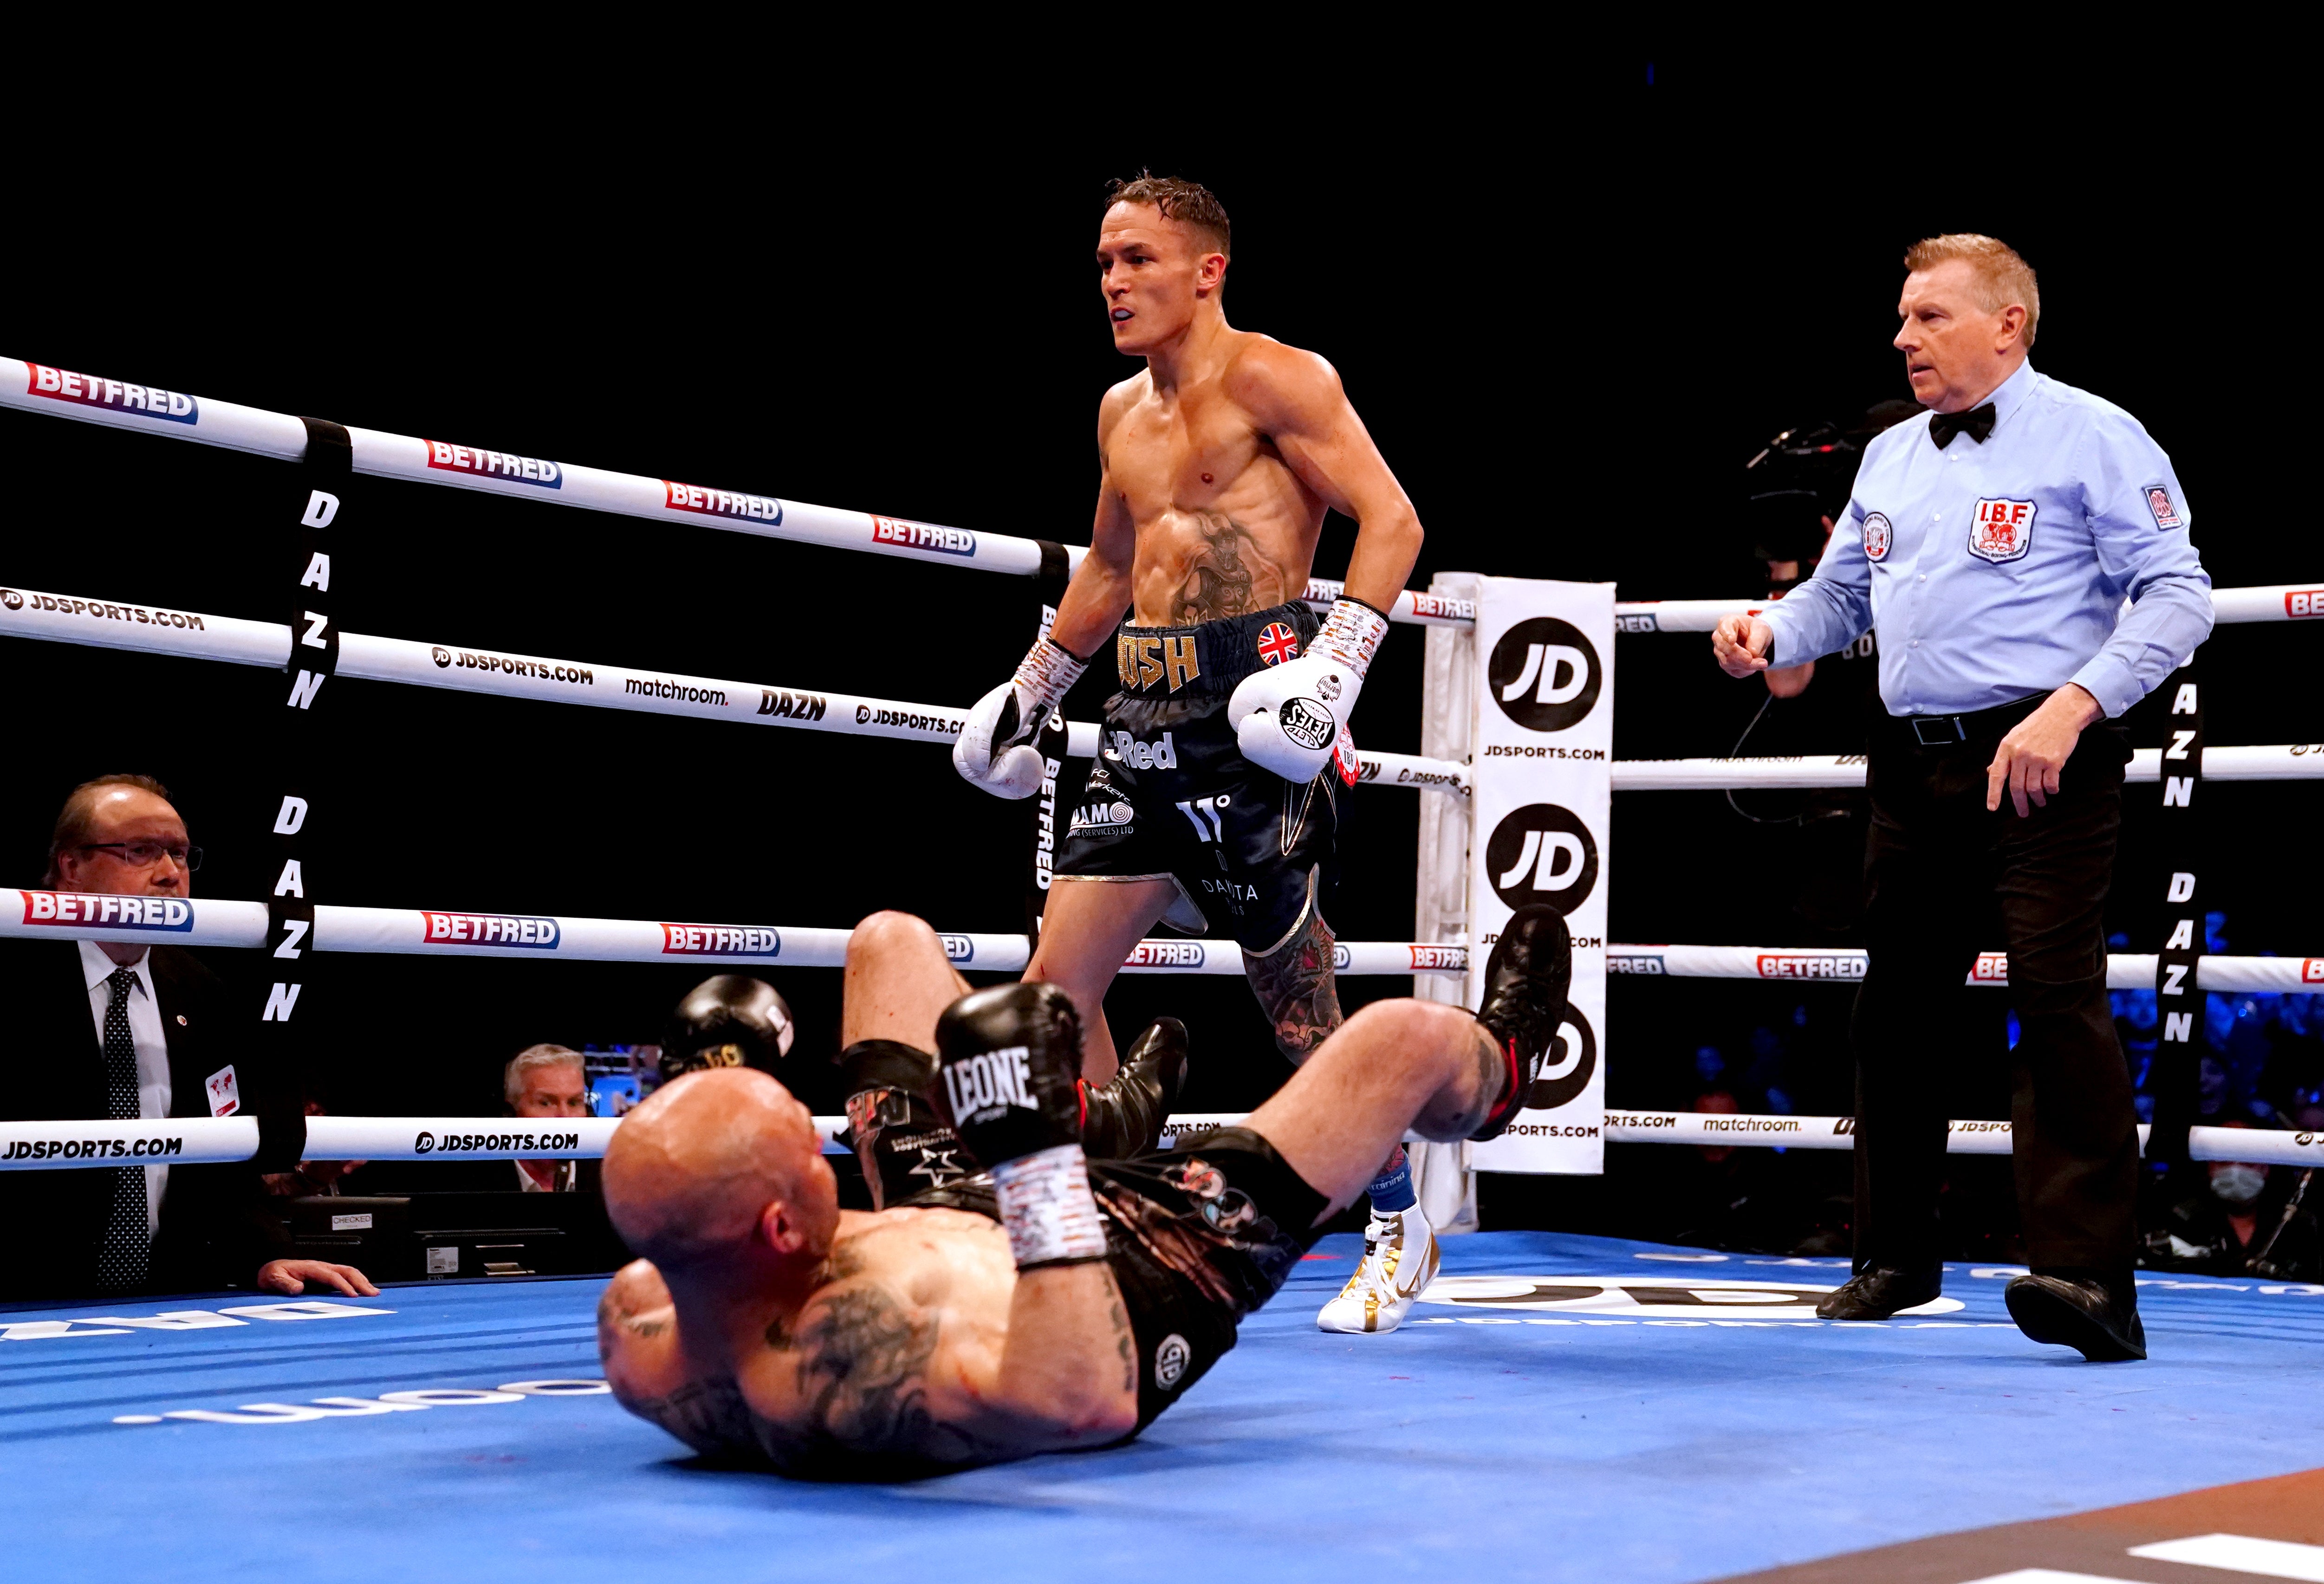 Warrington sent Martinez to the canvas in the opening round before stopping the Spaniard in the seventh round (Martin Rickett/PA)